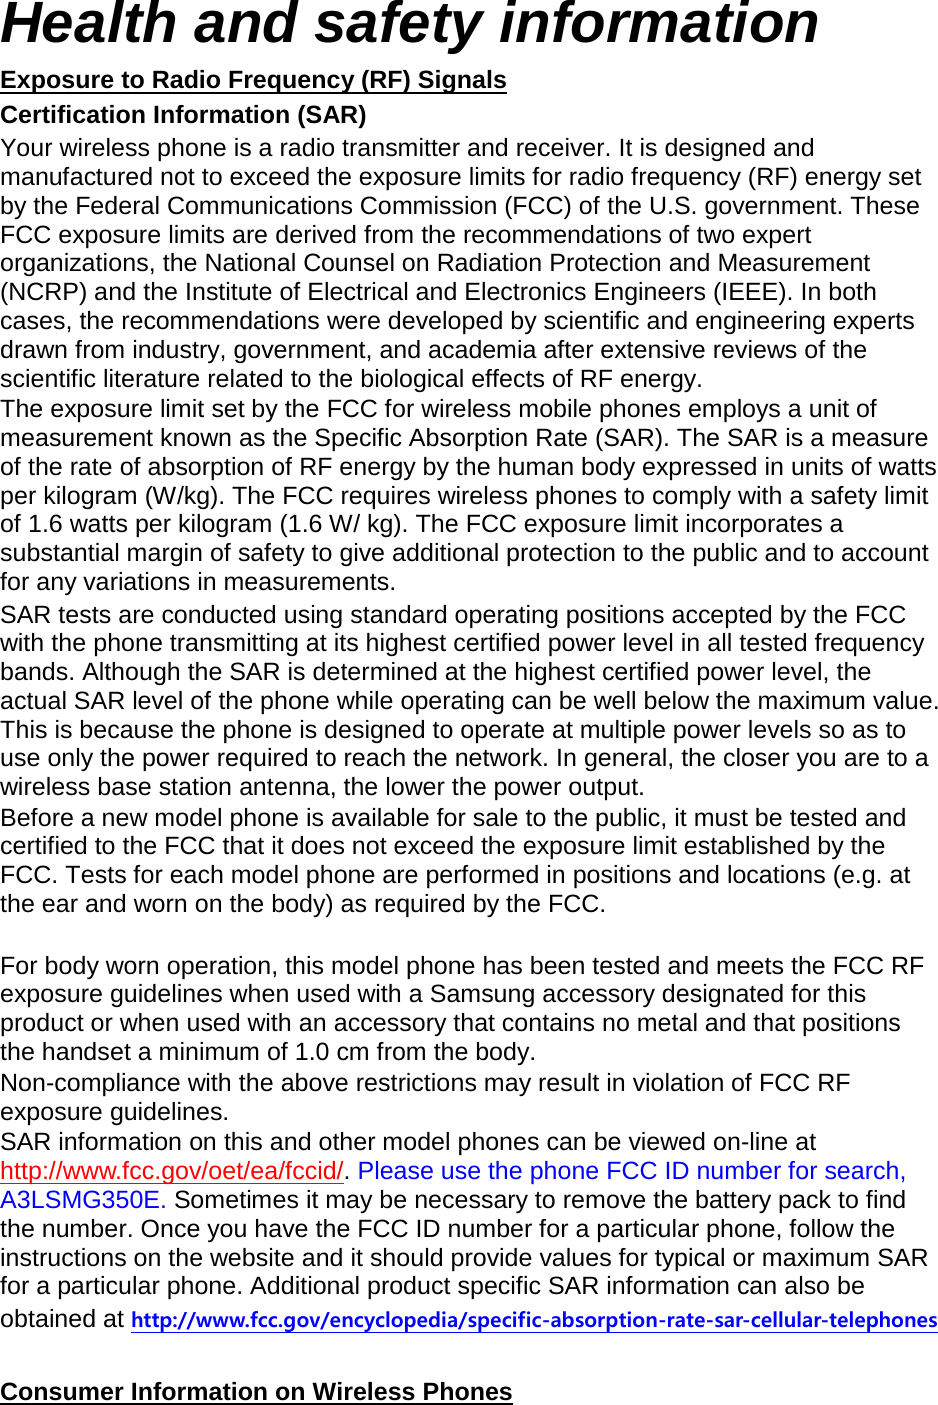 Health and safety information Exposure to Radio Frequency (RF) Signals Certification Information (SAR) Your wireless phone is a radio transmitter and receiver. It is designed and manufactured not to exceed the exposure limits for radio frequency (RF) energy set by the Federal Communications Commission (FCC) of the U.S. government. These FCC exposure limits are derived from the recommendations of two expert organizations, the National Counsel on Radiation Protection and Measurement (NCRP) and the Institute of Electrical and Electronics Engineers (IEEE). In both cases, the recommendations were developed by scientific and engineering experts drawn from industry, government, and academia after extensive reviews of the scientific literature related to the biological effects of RF energy. The exposure limit set by the FCC for wireless mobile phones employs a unit of measurement known as the Specific Absorption Rate (SAR). The SAR is a measure of the rate of absorption of RF energy by the human body expressed in units of watts per kilogram (W/kg). The FCC requires wireless phones to comply with a safety limit of 1.6 watts per kilogram (1.6 W/ kg). The FCC exposure limit incorporates a substantial margin of safety to give additional protection to the public and to account for any variations in measurements. SAR tests are conducted using standard operating positions accepted by the FCC with the phone transmitting at its highest certified power level in all tested frequency bands. Although the SAR is determined at the highest certified power level, the actual SAR level of the phone while operating can be well below the maximum value. This is because the phone is designed to operate at multiple power levels so as to use only the power required to reach the network. In general, the closer you are to a wireless base station antenna, the lower the power output. Before a new model phone is available for sale to the public, it must be tested and certified to the FCC that it does not exceed the exposure limit established by the FCC. Tests for each model phone are performed in positions and locations (e.g. at the ear and worn on the body) as required by the FCC.      For body worn operation, this model phone has been tested and meets the FCC RF exposure guidelines when used with a Samsung accessory designated for this product or when used with an accessory that contains no metal and that positions the handset a minimum of 1.0 cm from the body.   Non-compliance with the above restrictions may result in violation of FCC RF exposure guidelines. SAR information on this and other model phones can be viewed on-line at http://www.fcc.gov/oet/ea/fccid/. Please use the phone FCC ID number for search, A3LSMG350E. Sometimes it may be necessary to remove the battery pack to find the number. Once you have the FCC ID number for a particular phone, follow the instructions on the website and it should provide values for typical or maximum SAR for a particular phone. Additional product specific SAR information can also be obtained at http://www.fcc.gov/encyclopedia/specific-absorption-rate-sar-cellular-telephones  Consumer Information on Wireless Phones 